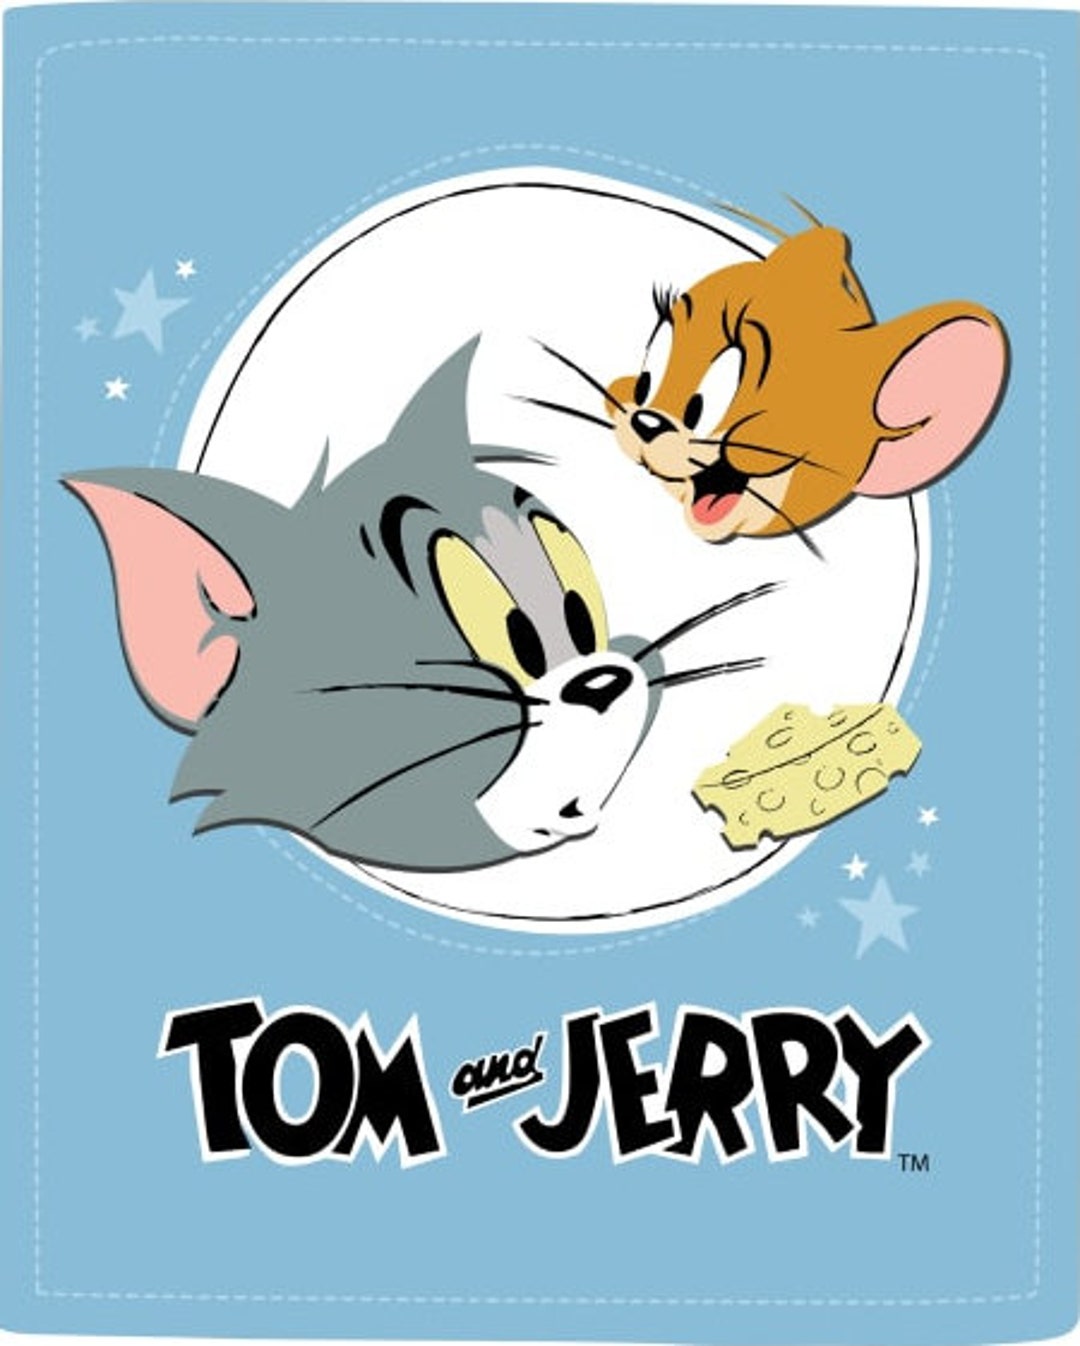 Buy Tom and Jerry Cute & Cranky Collection Stitch-line Panel ...